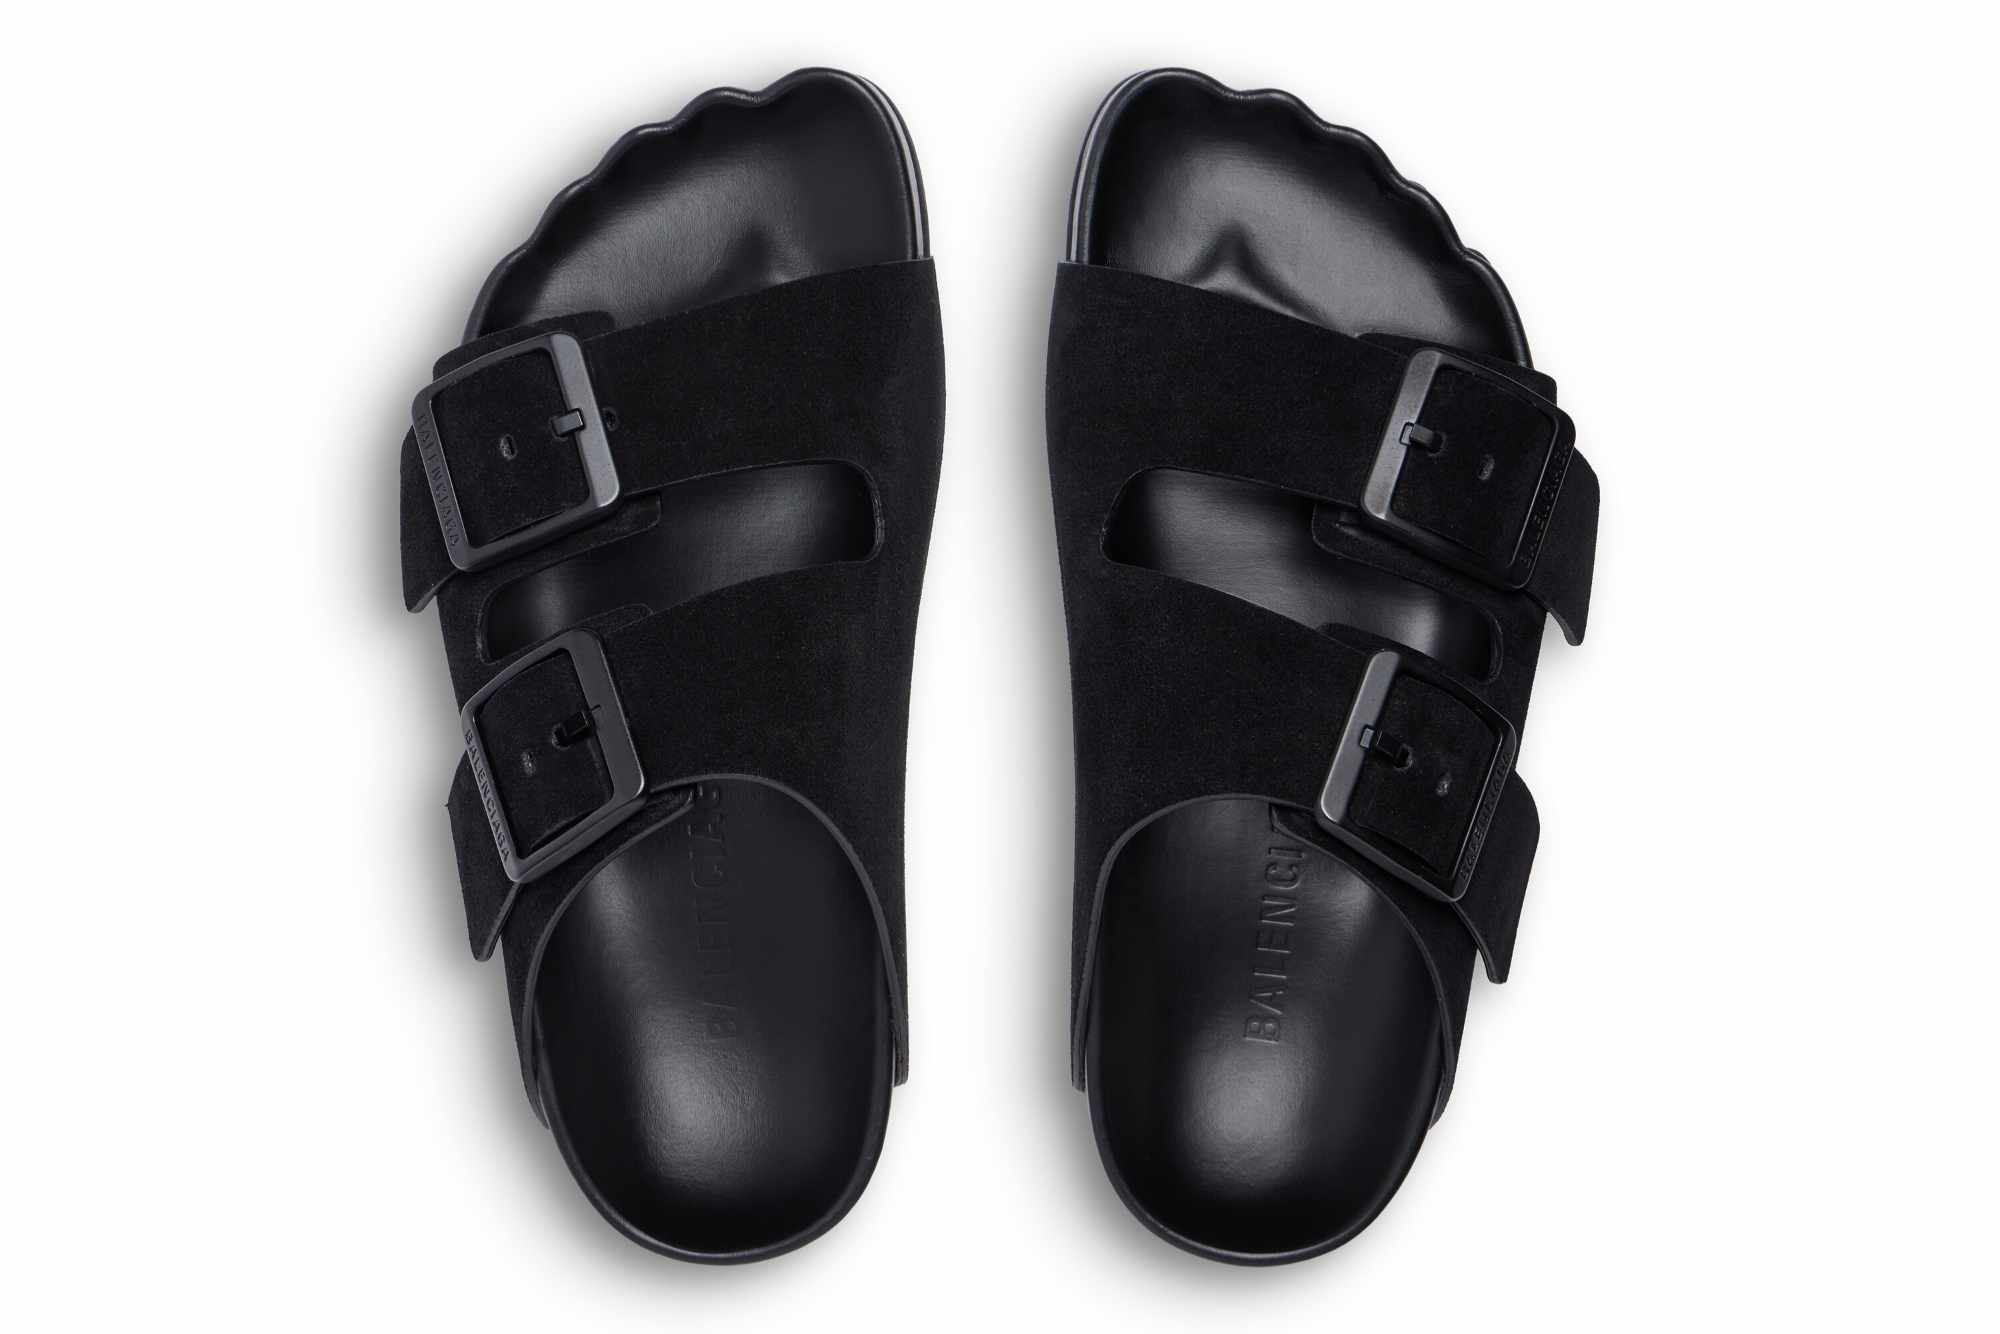 Balenciaga's Sunday Sandal in black suede, with two buckled straps and footbed